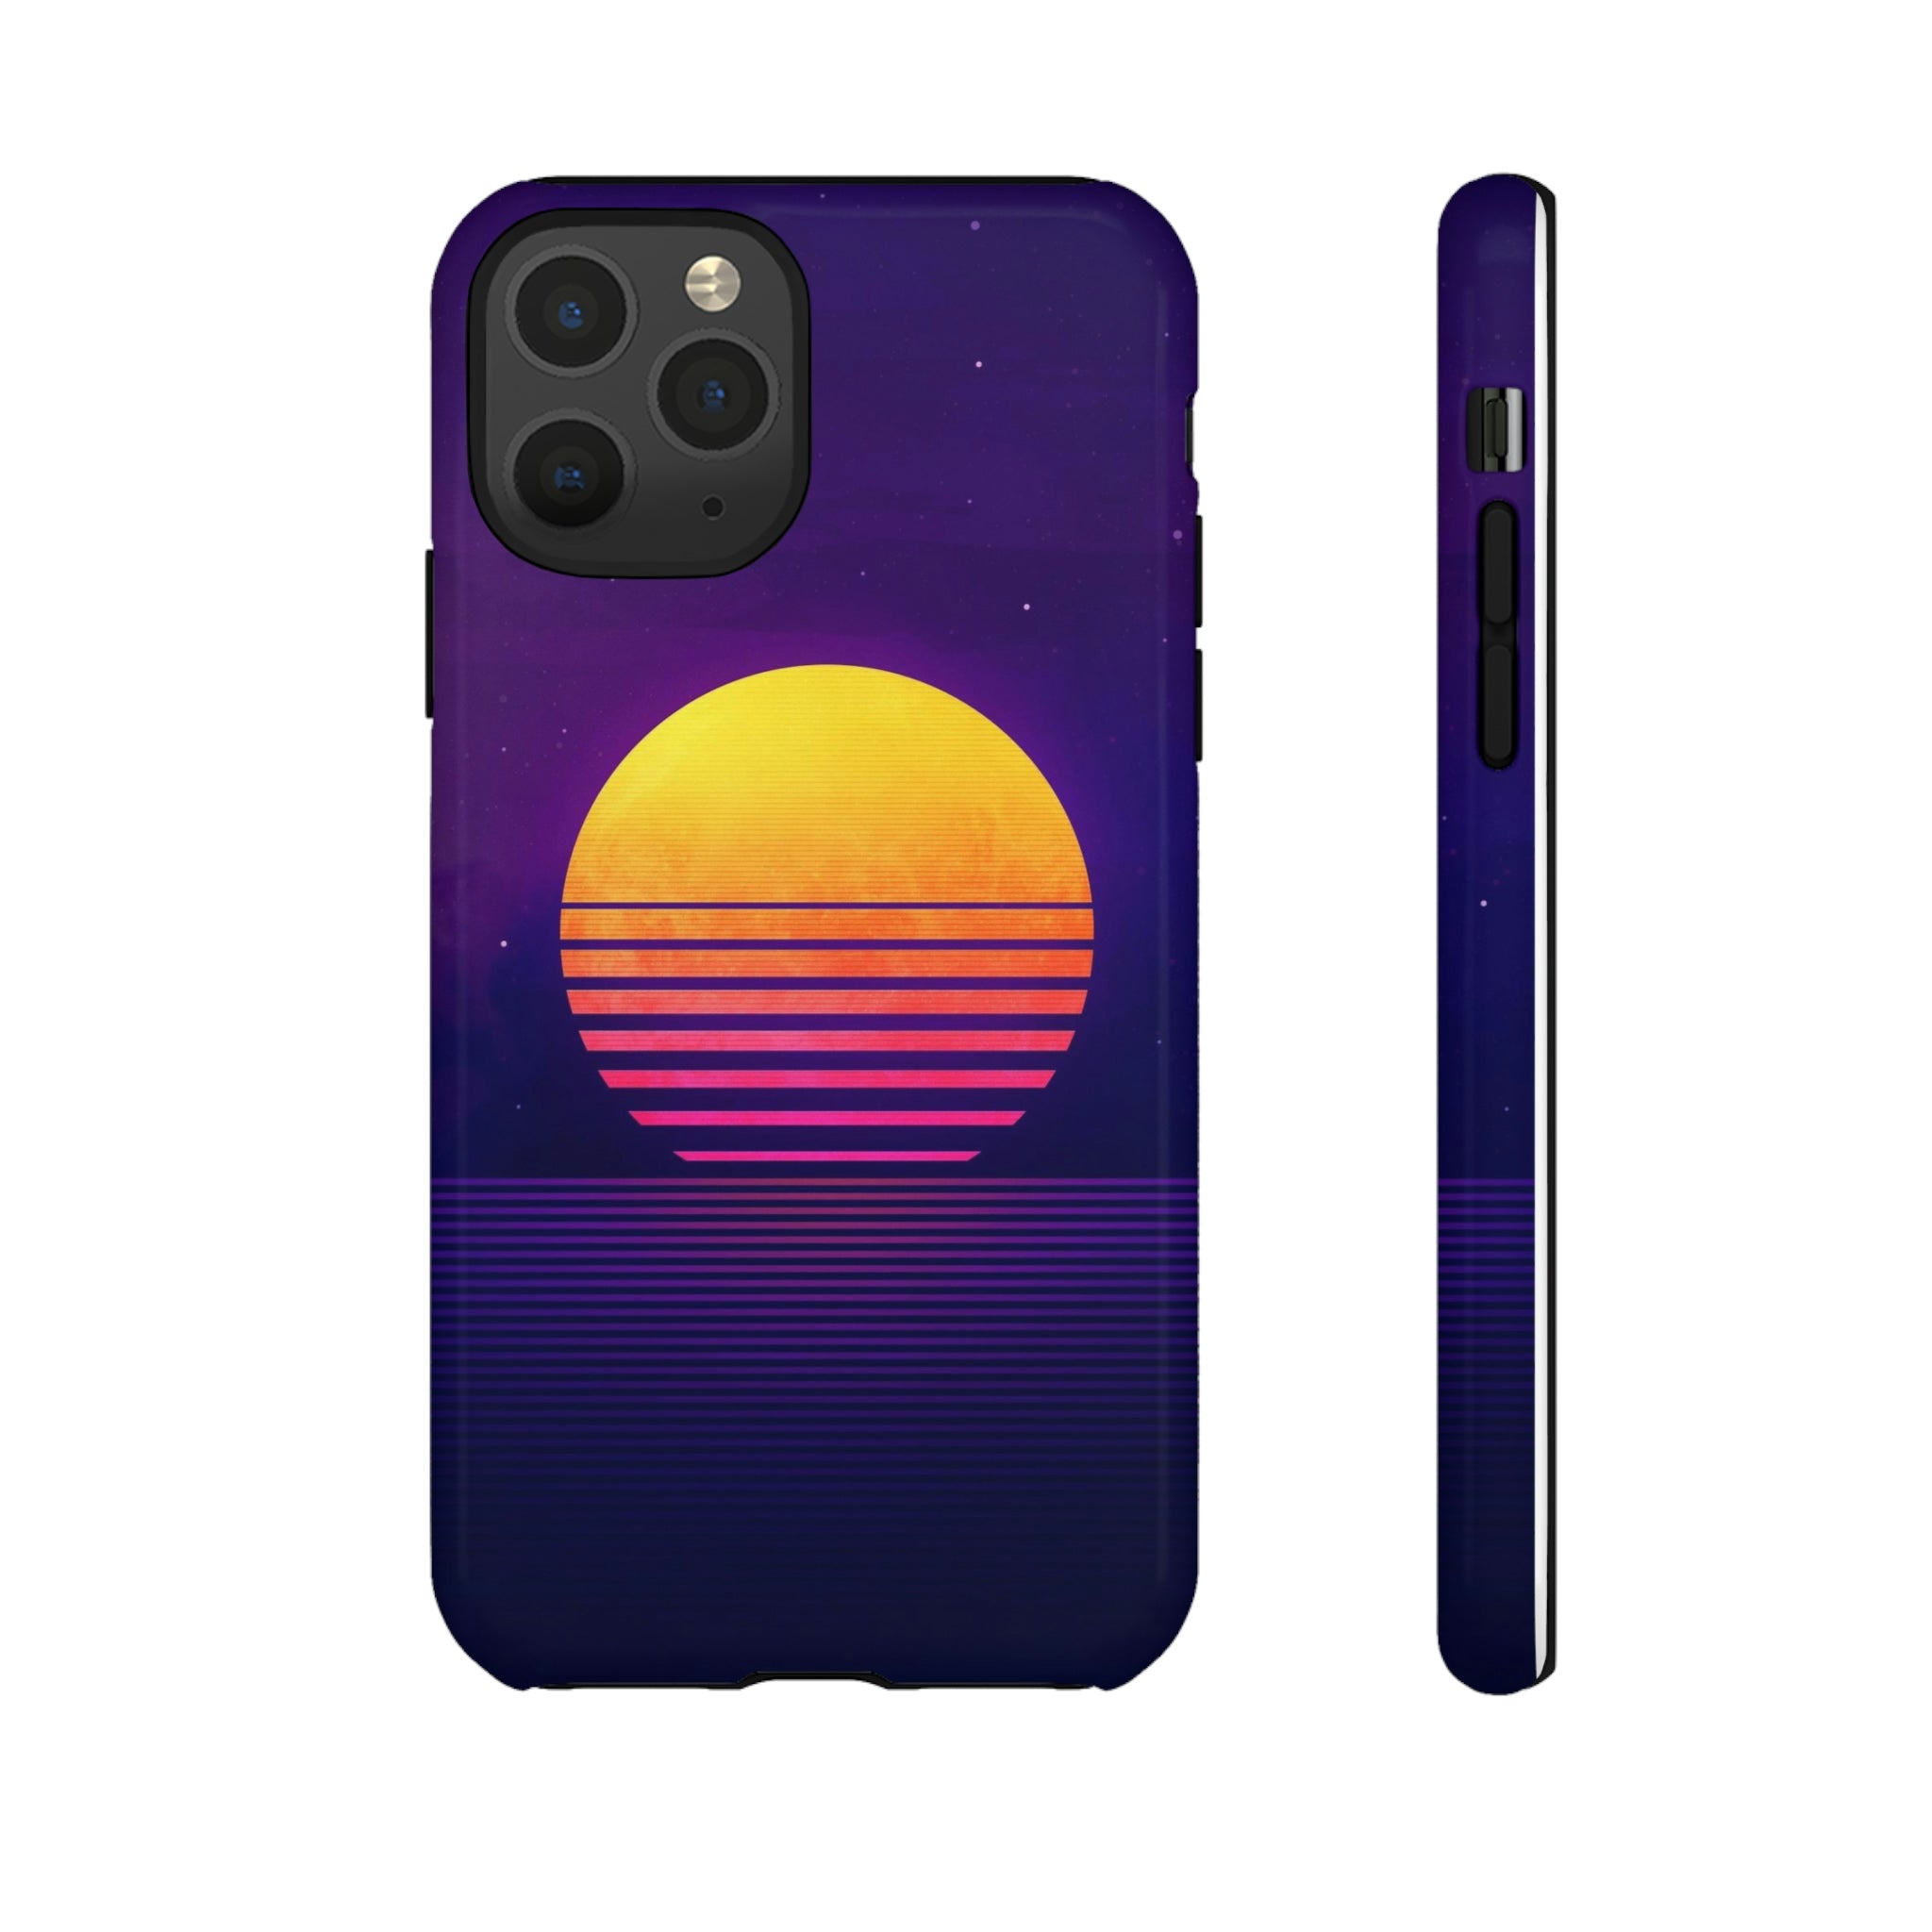 Retrowave Sunset - Dual Layered, Full Body, Armored Phone Case for iPhone 13/Samsung Galaxy S22/Google Pixel 6